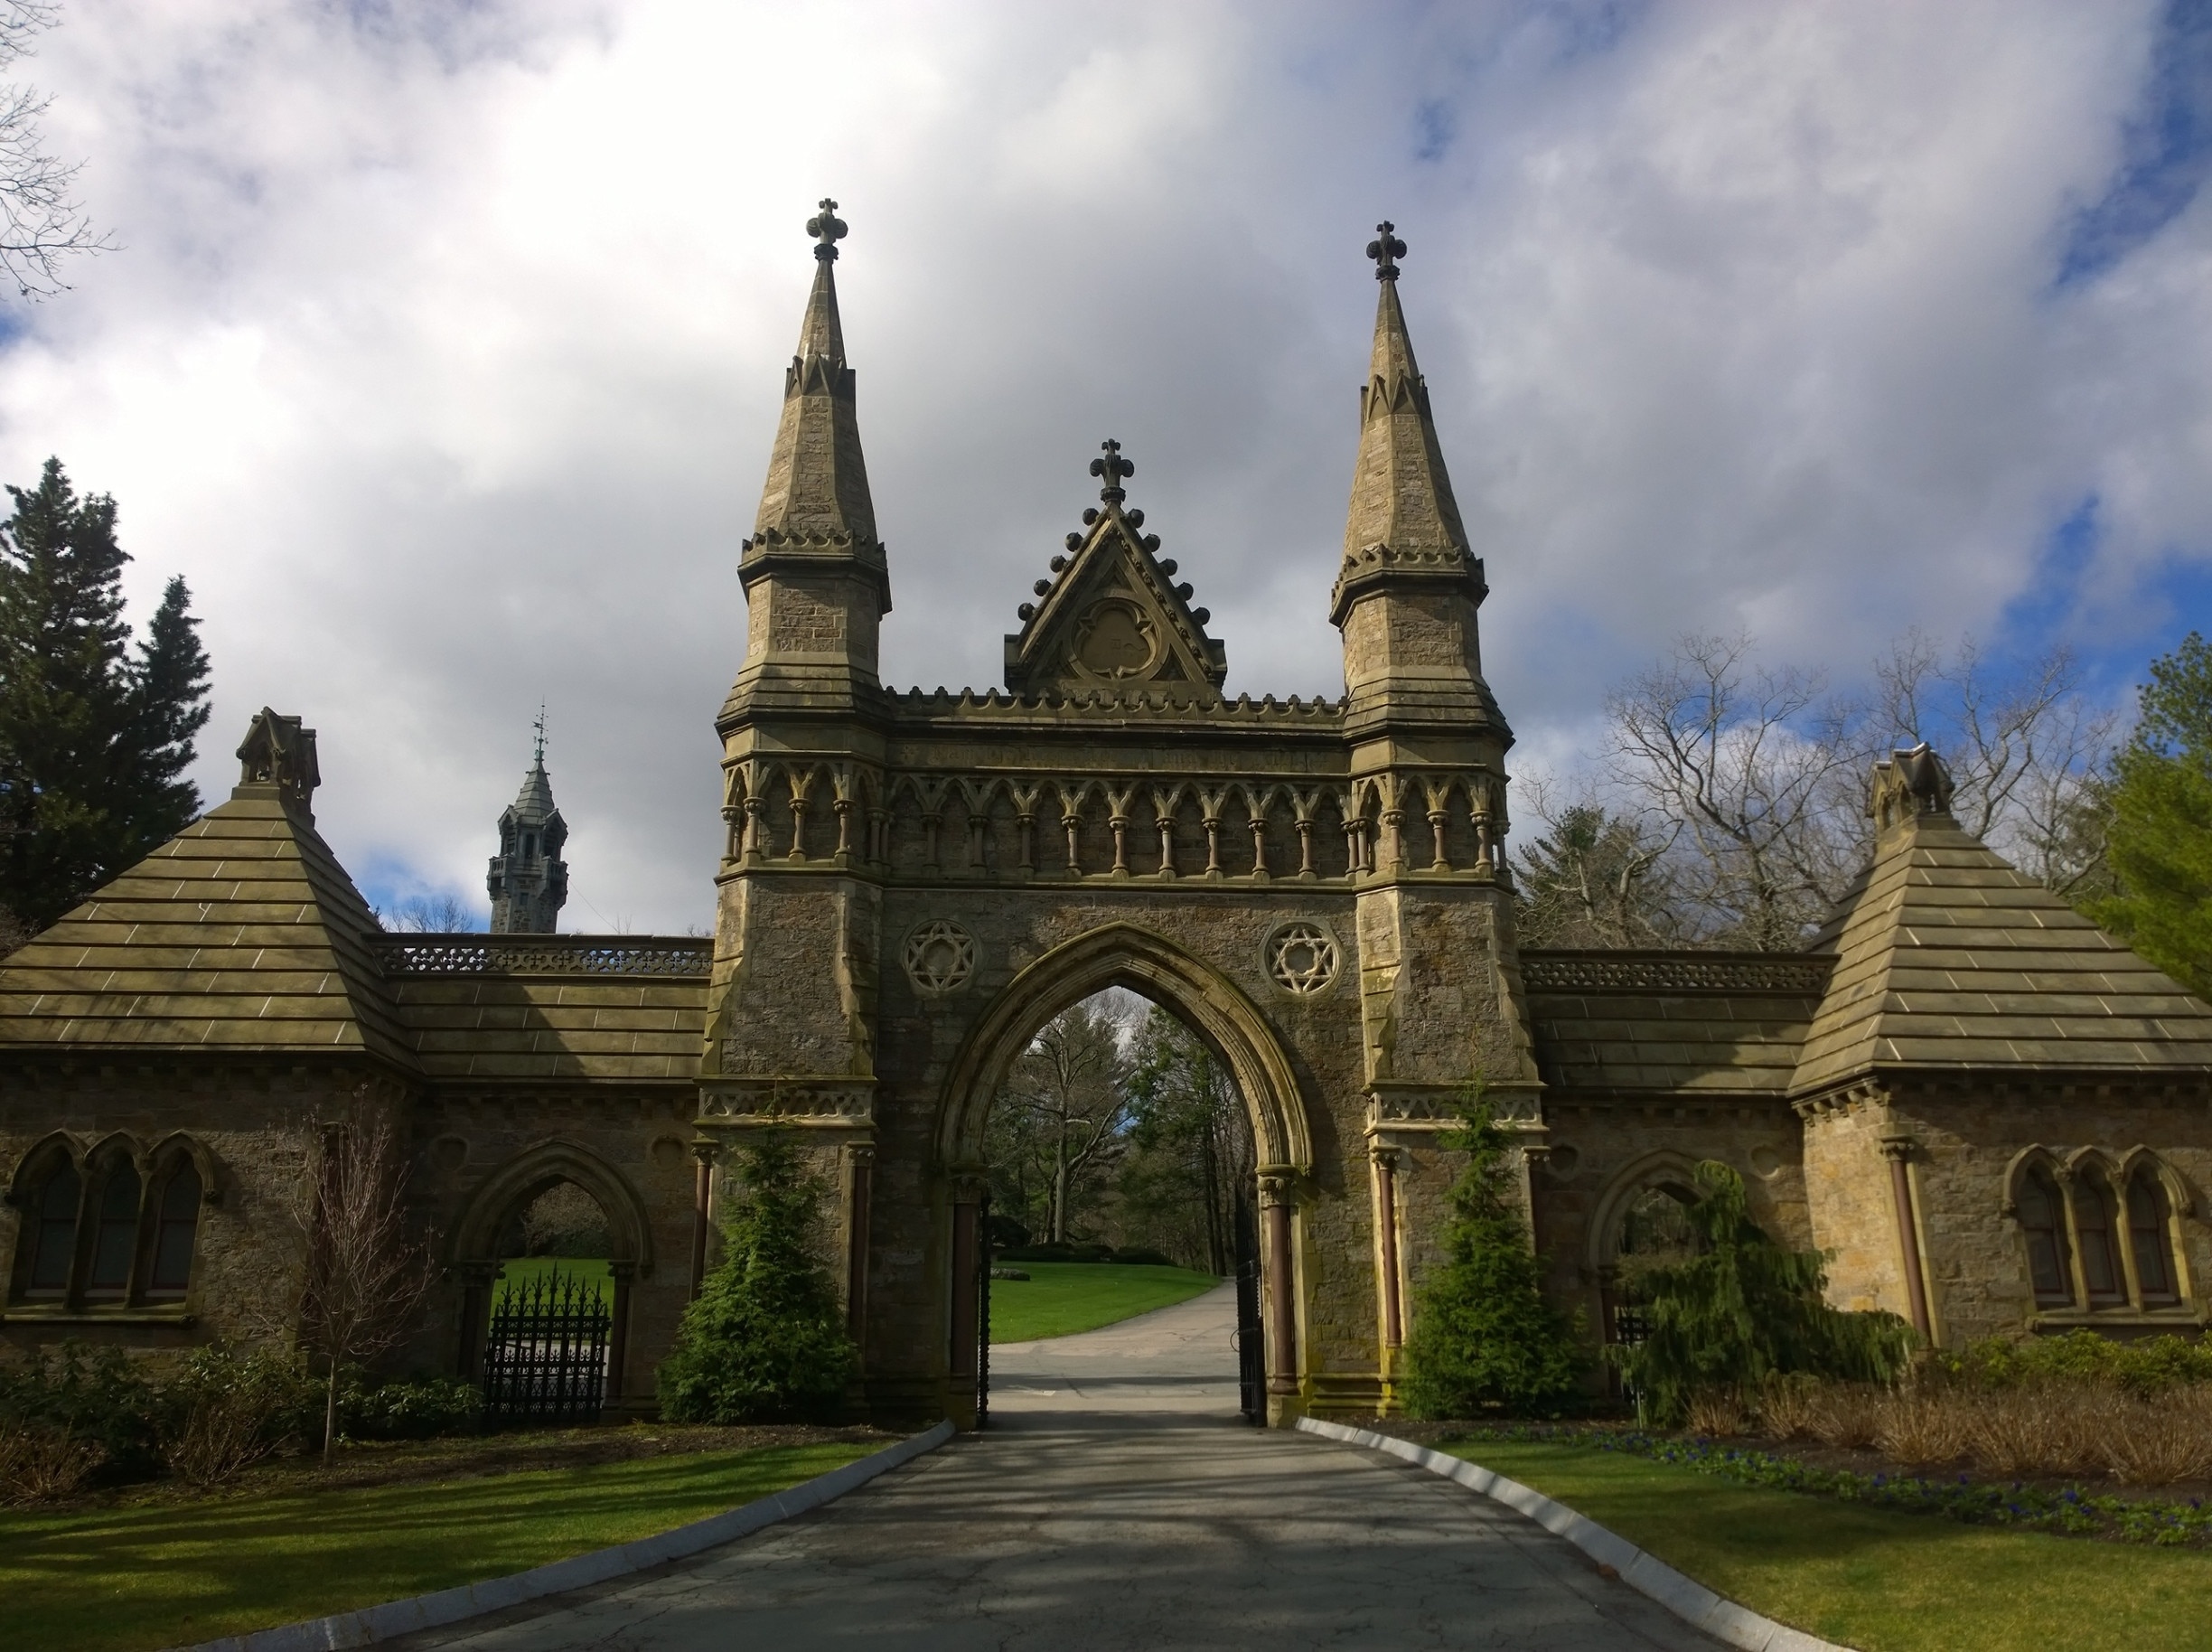 The impressive front main gate of Forest Hills Cemetery standing out against the #blue sky.

Built in 1848, Forest Hills Cemetery is a historic 275-acre cemetery, greenspace, arboretum and sculpture garden located in the Jamaica Plain neighborhood of Boston.